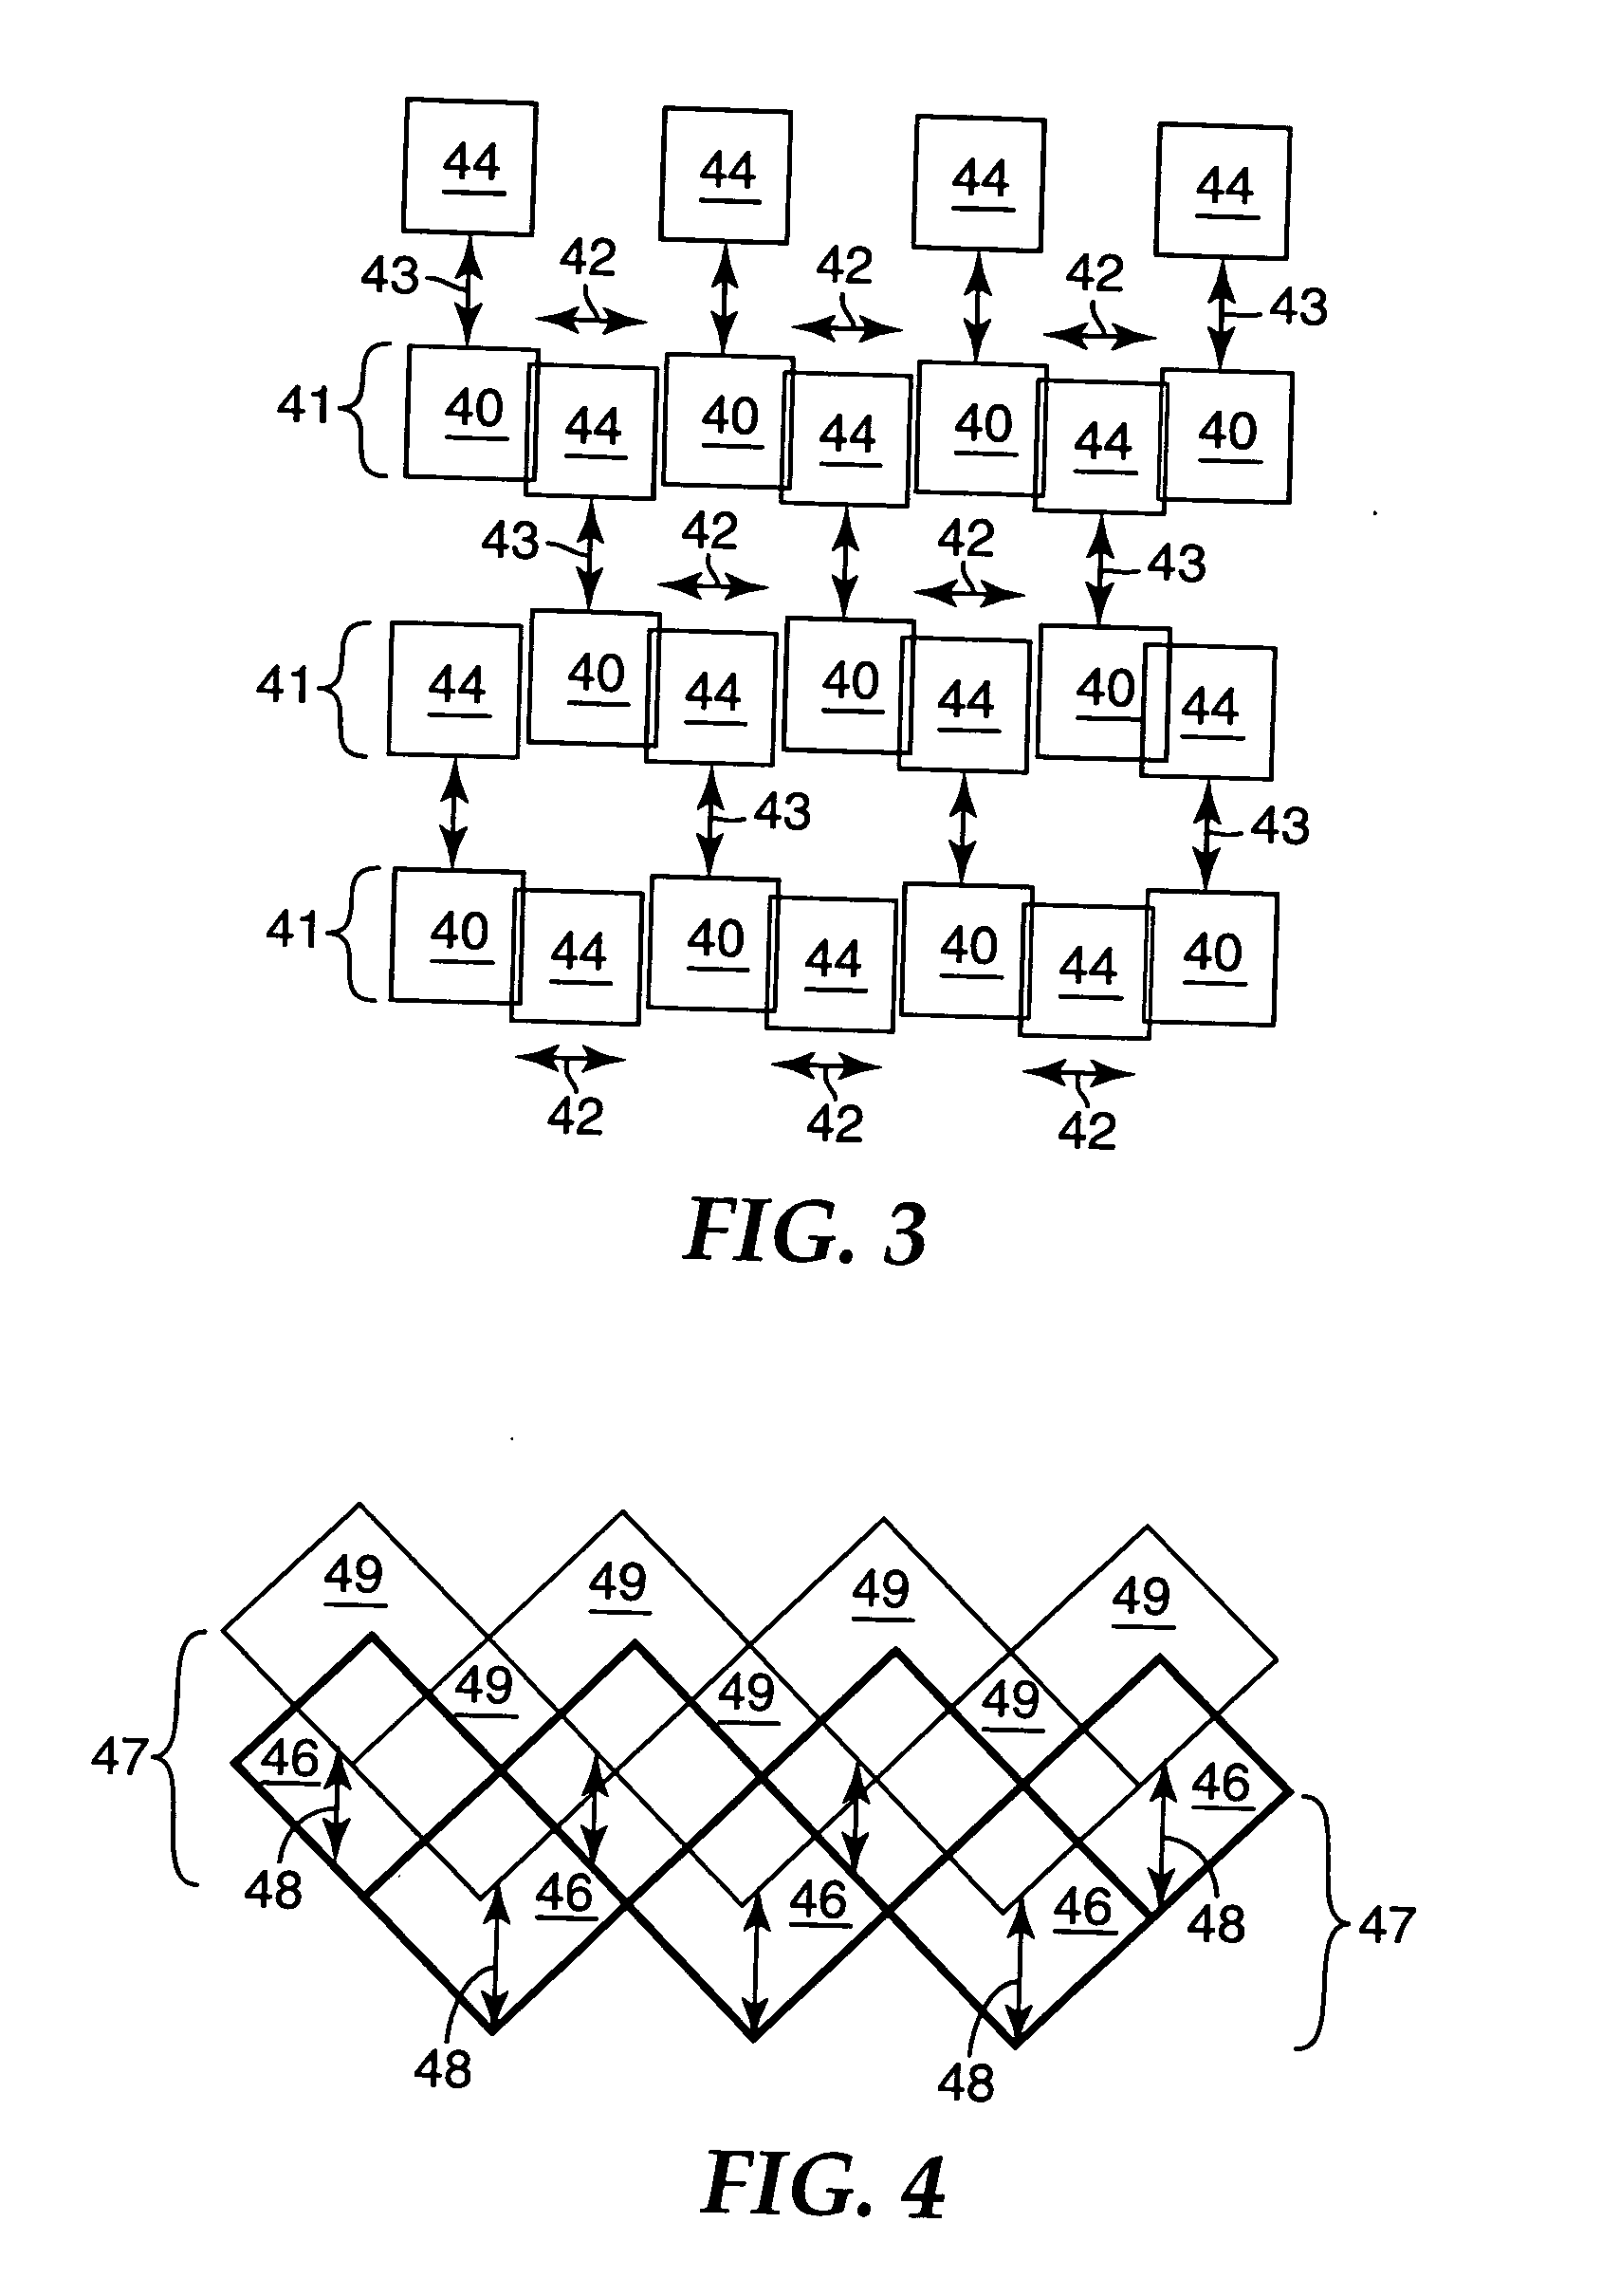 Pixel-shifting projection lens assembly to provide optical interlacing for increased addressability